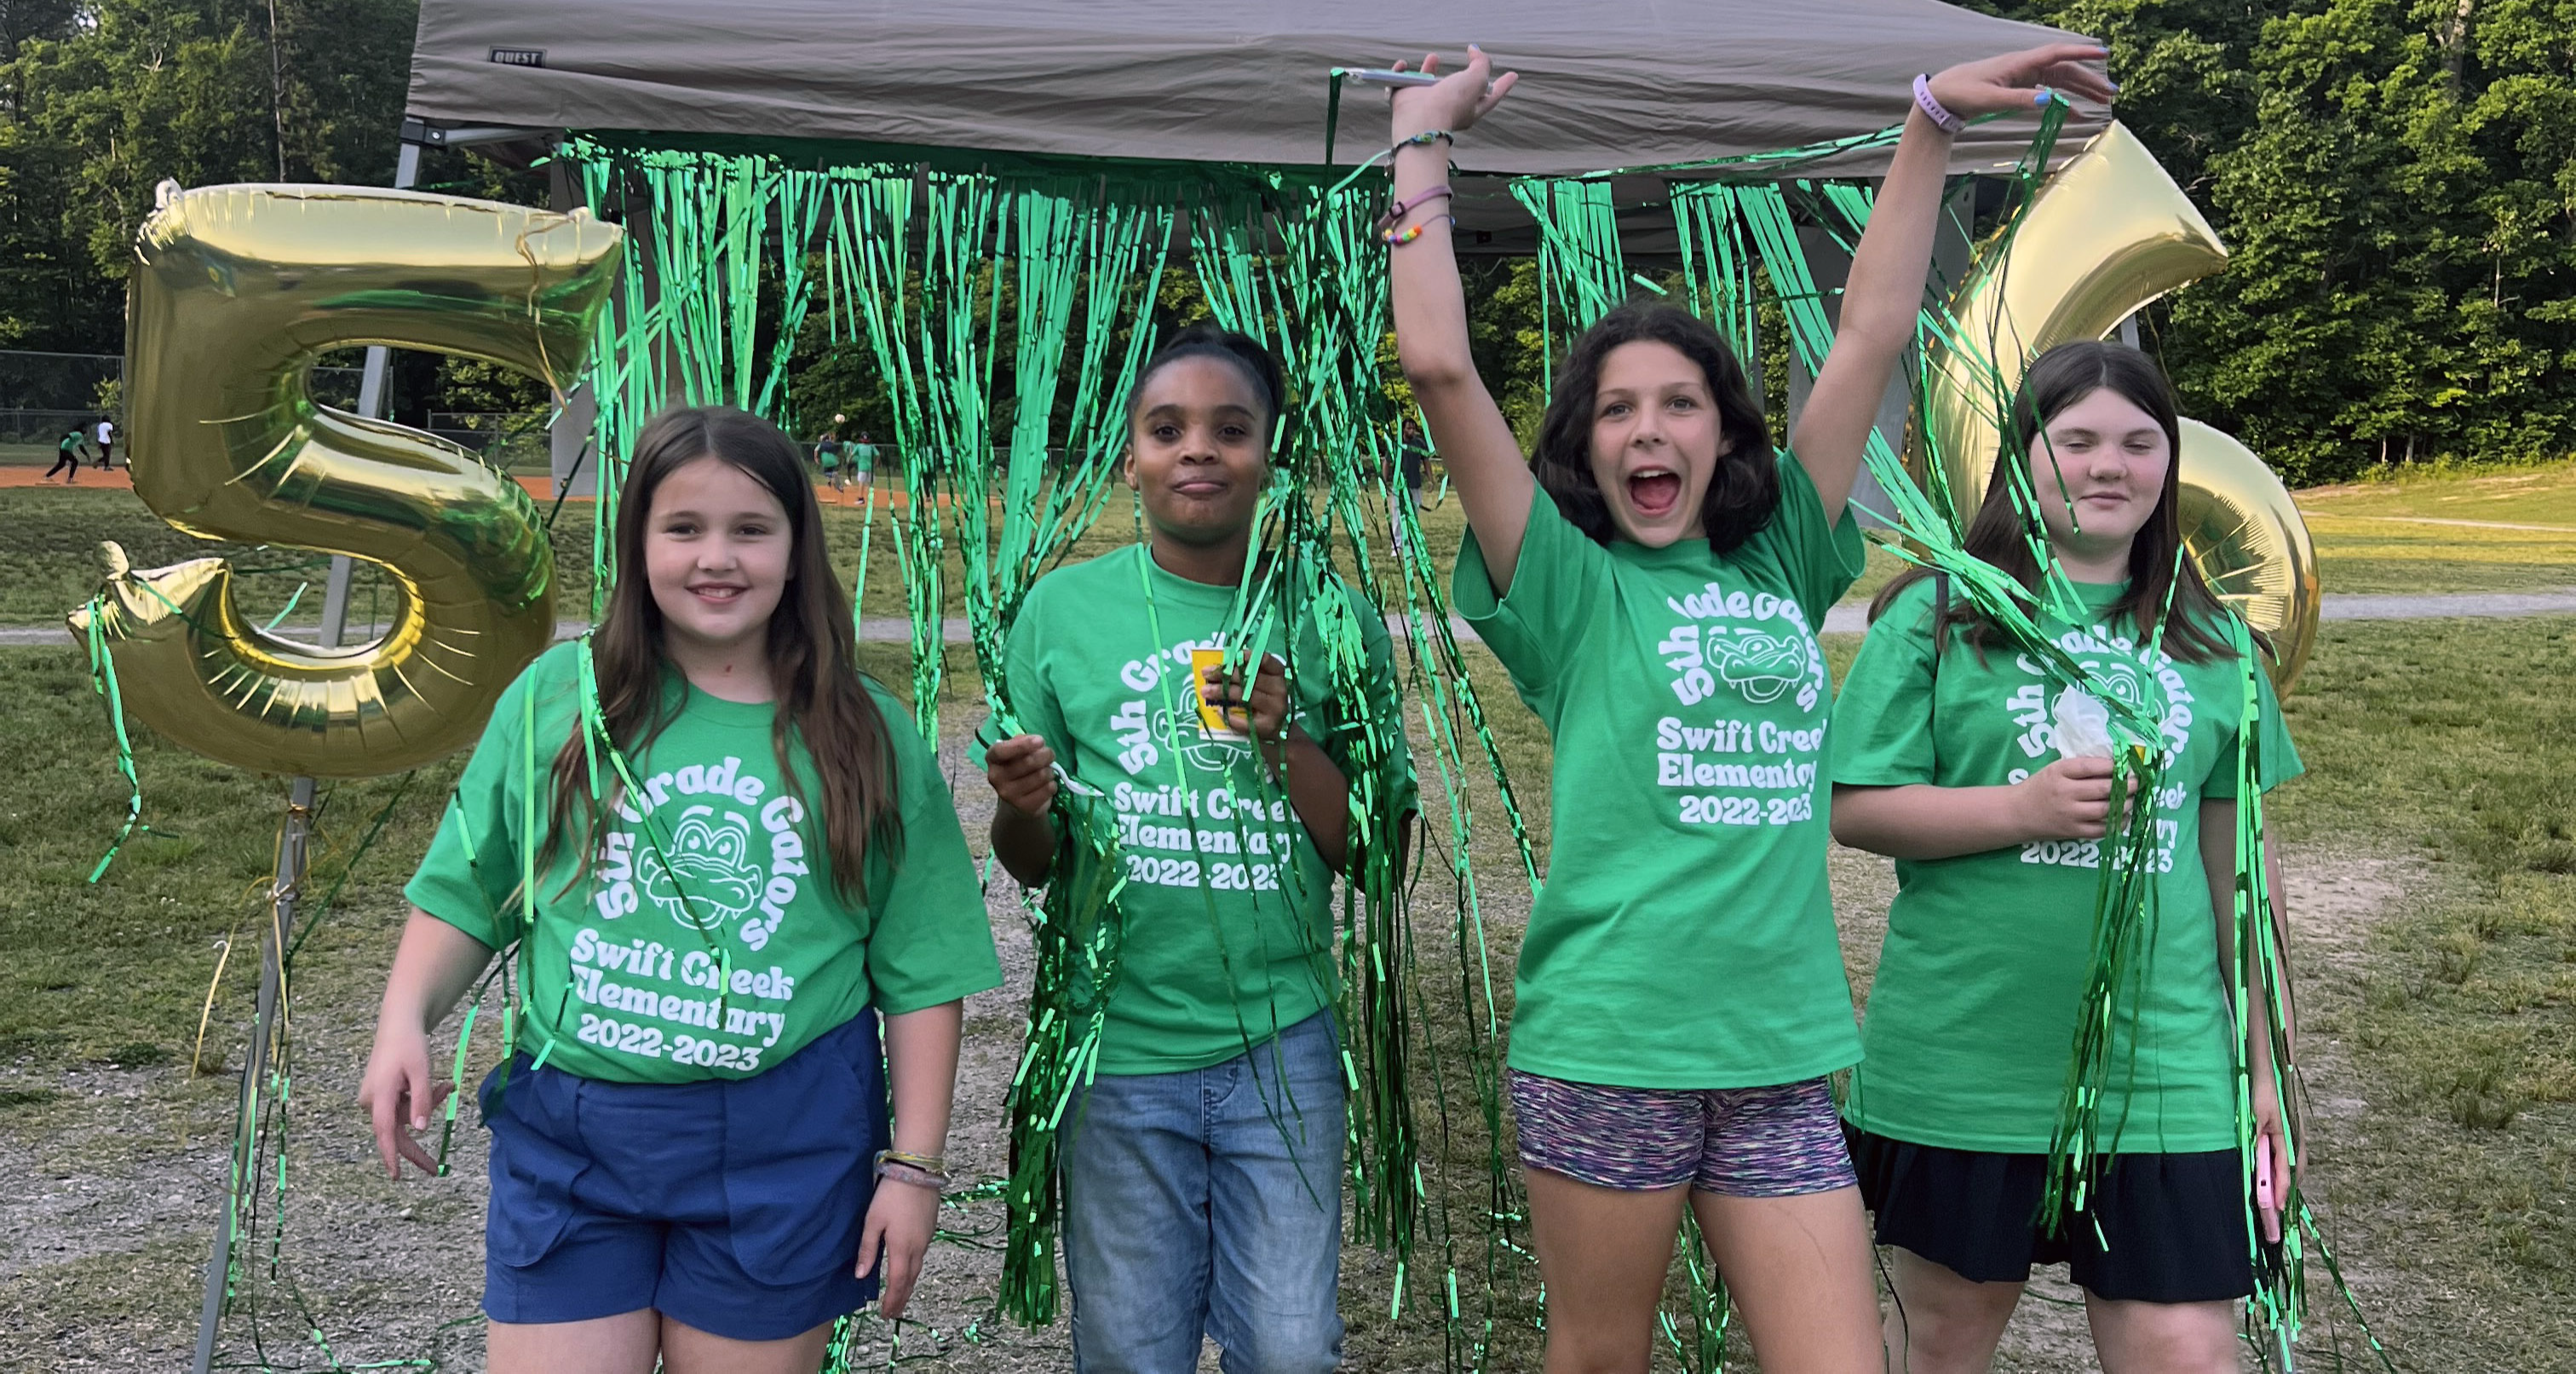 Four fifth graders wearing green shirts celebrating